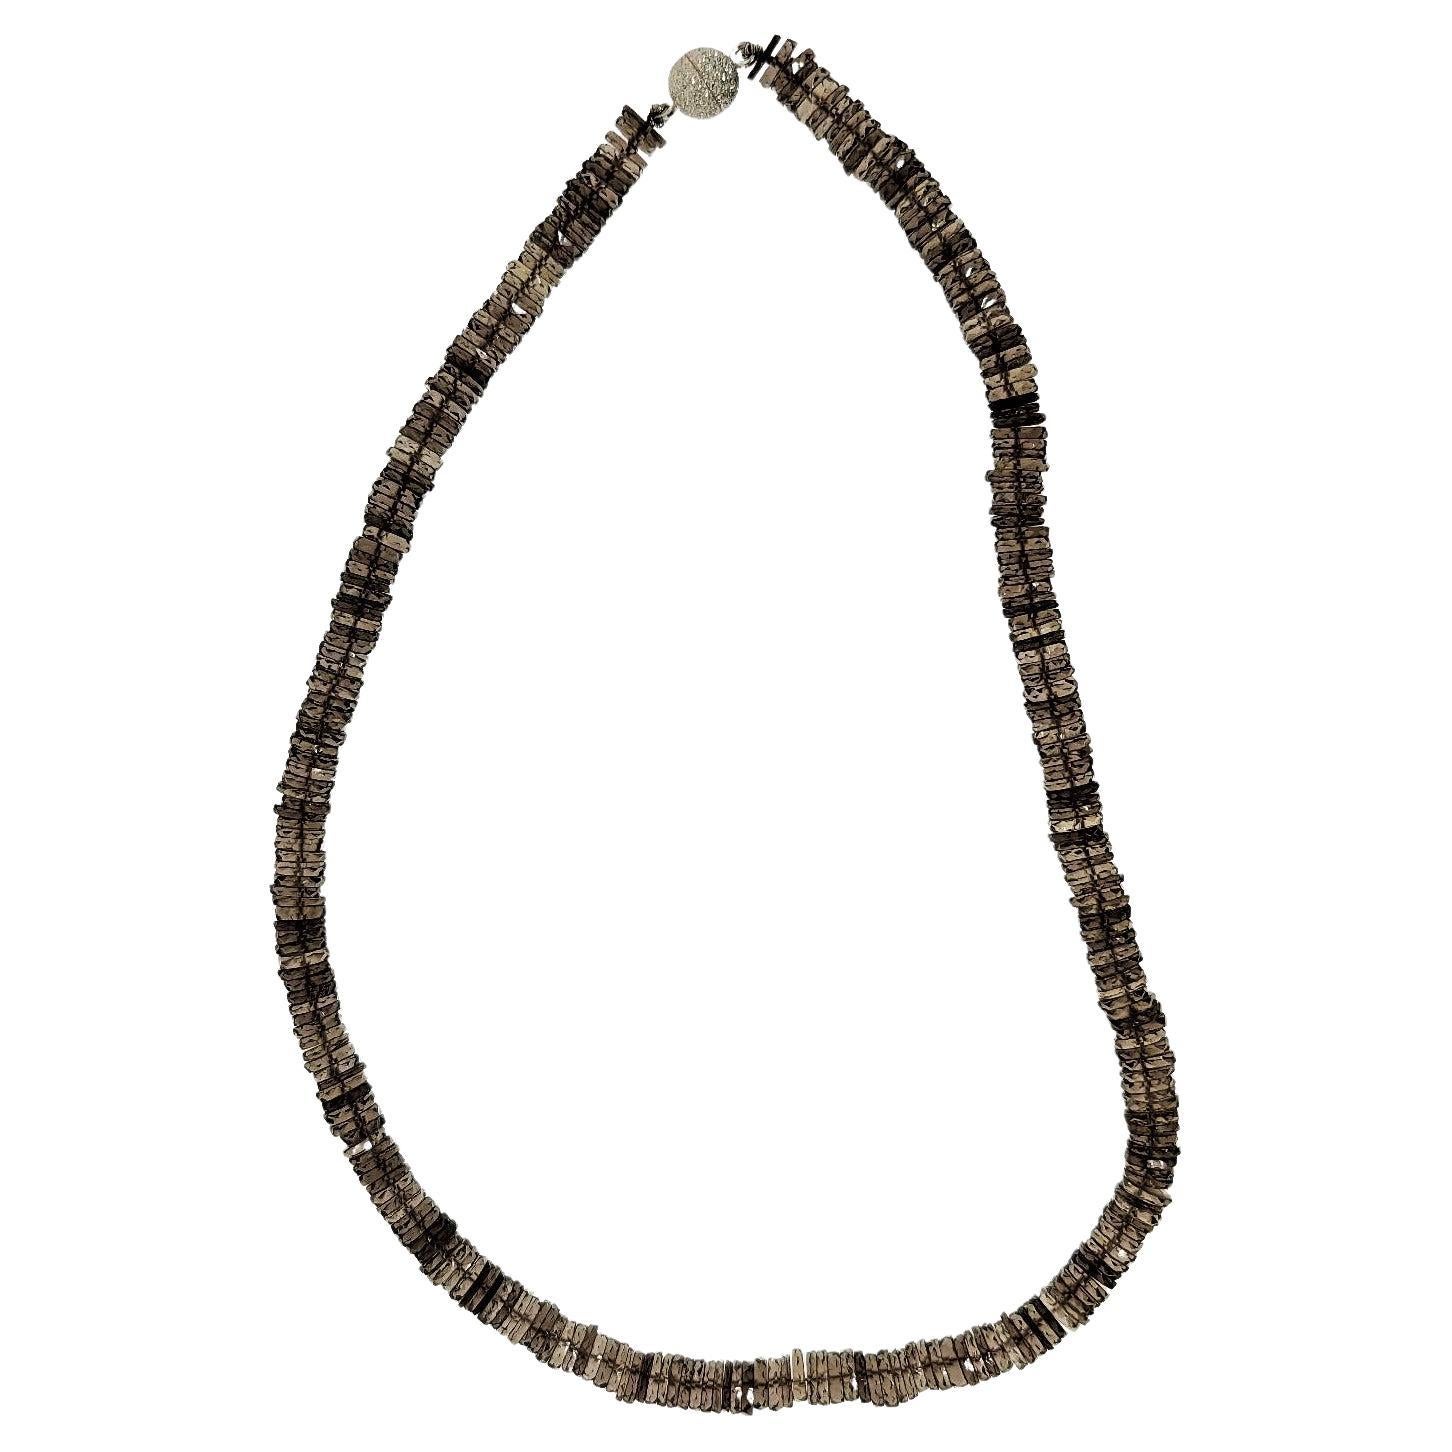 The faceted Smokey Quartz rondels in this necklace vary slightly in color and bring life into this stone.  Measuring 6.5-7mm in circumference and faceted on the end of the rondels, the beads are connected with a silver magnetic clasp.  The necklace